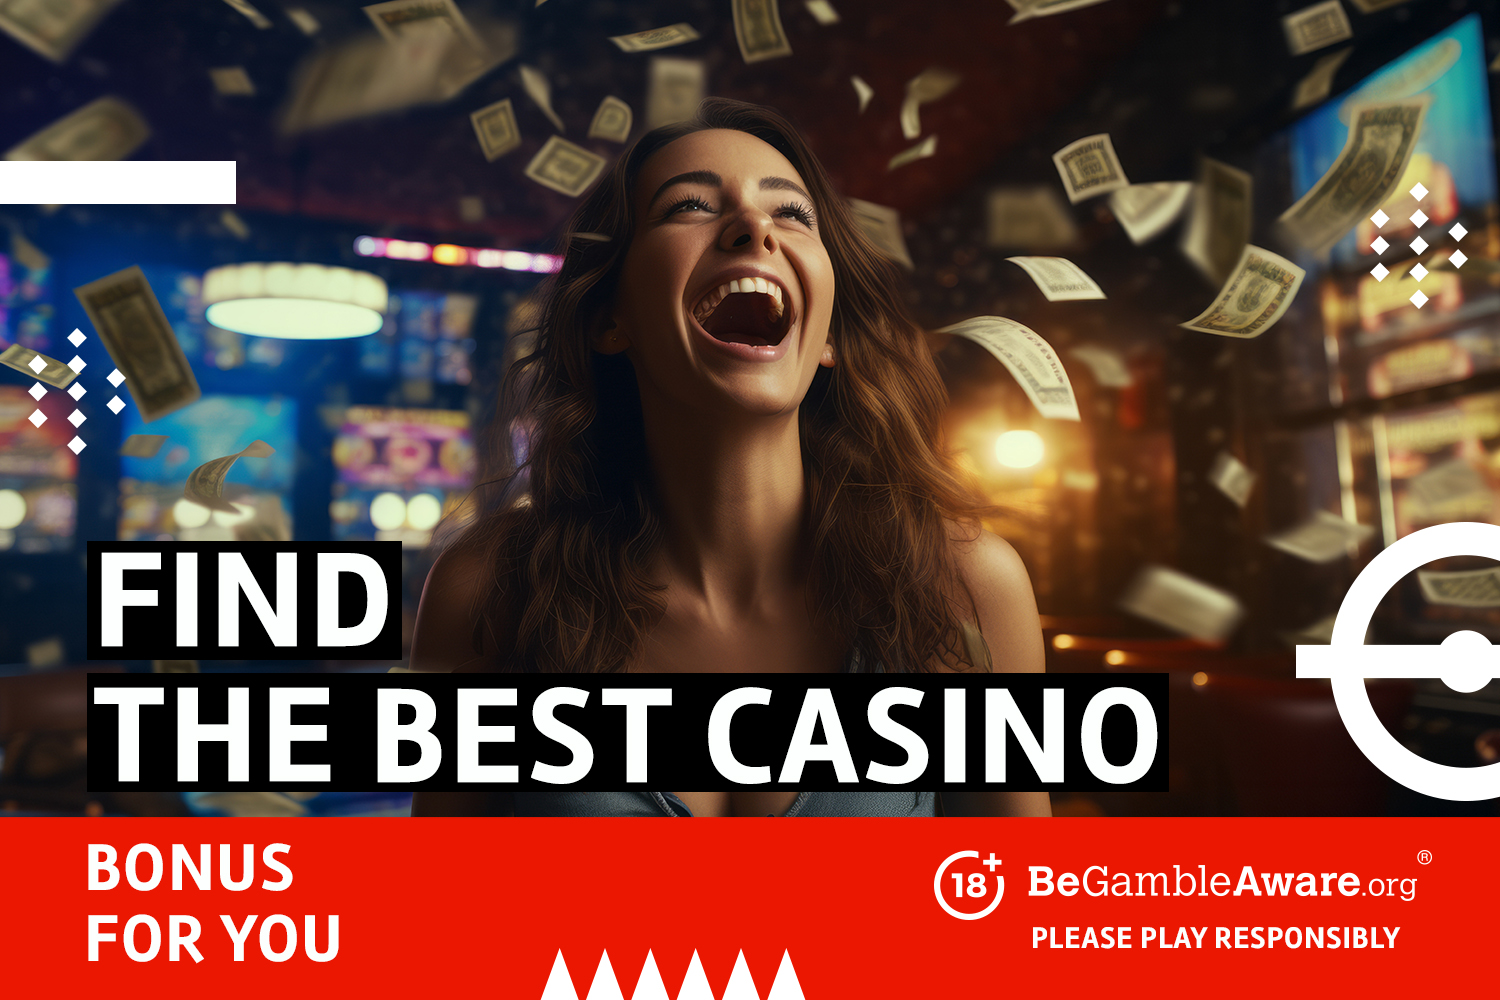 Find the best casino bonus for you. BeGambleAware.org - Please play responsibly.